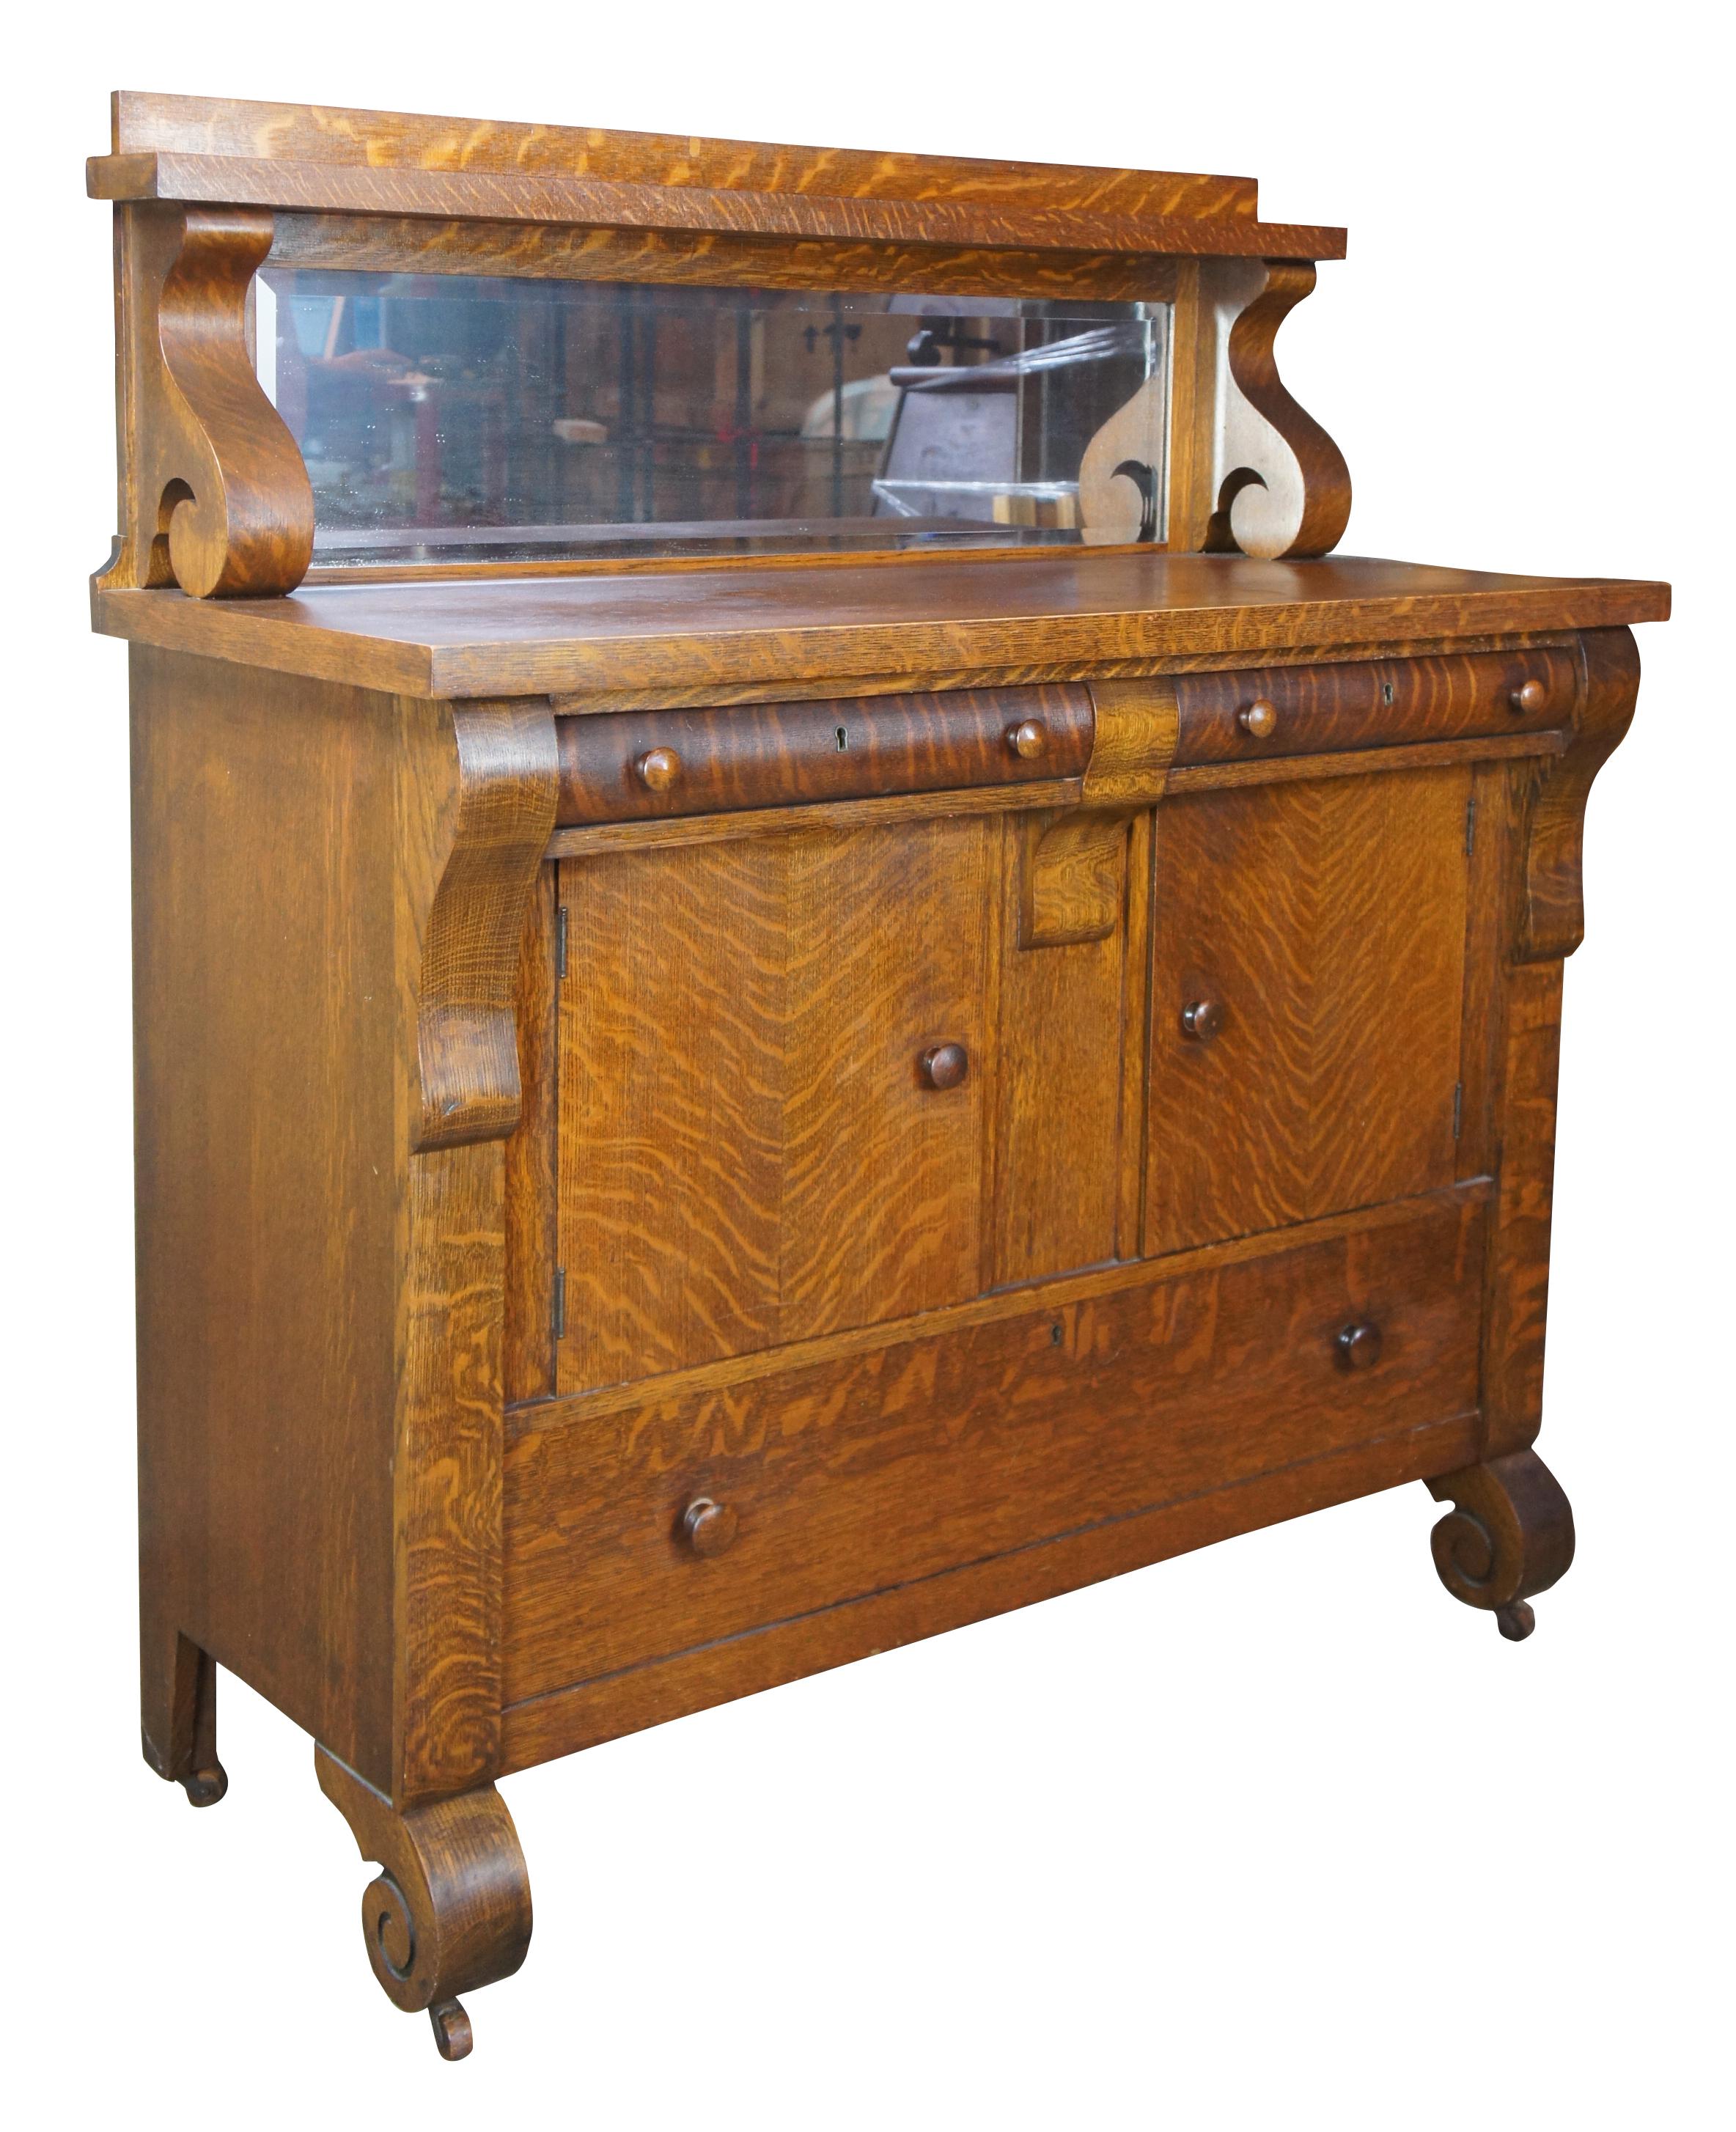 National furniture antique Empire quartersawn oak buffet or sideboard and mirror

Early 20th century buffet or server from National Furniture Company. Made from quartersawn oak with a contoured front featuring 3 drawers and a central cabinet for